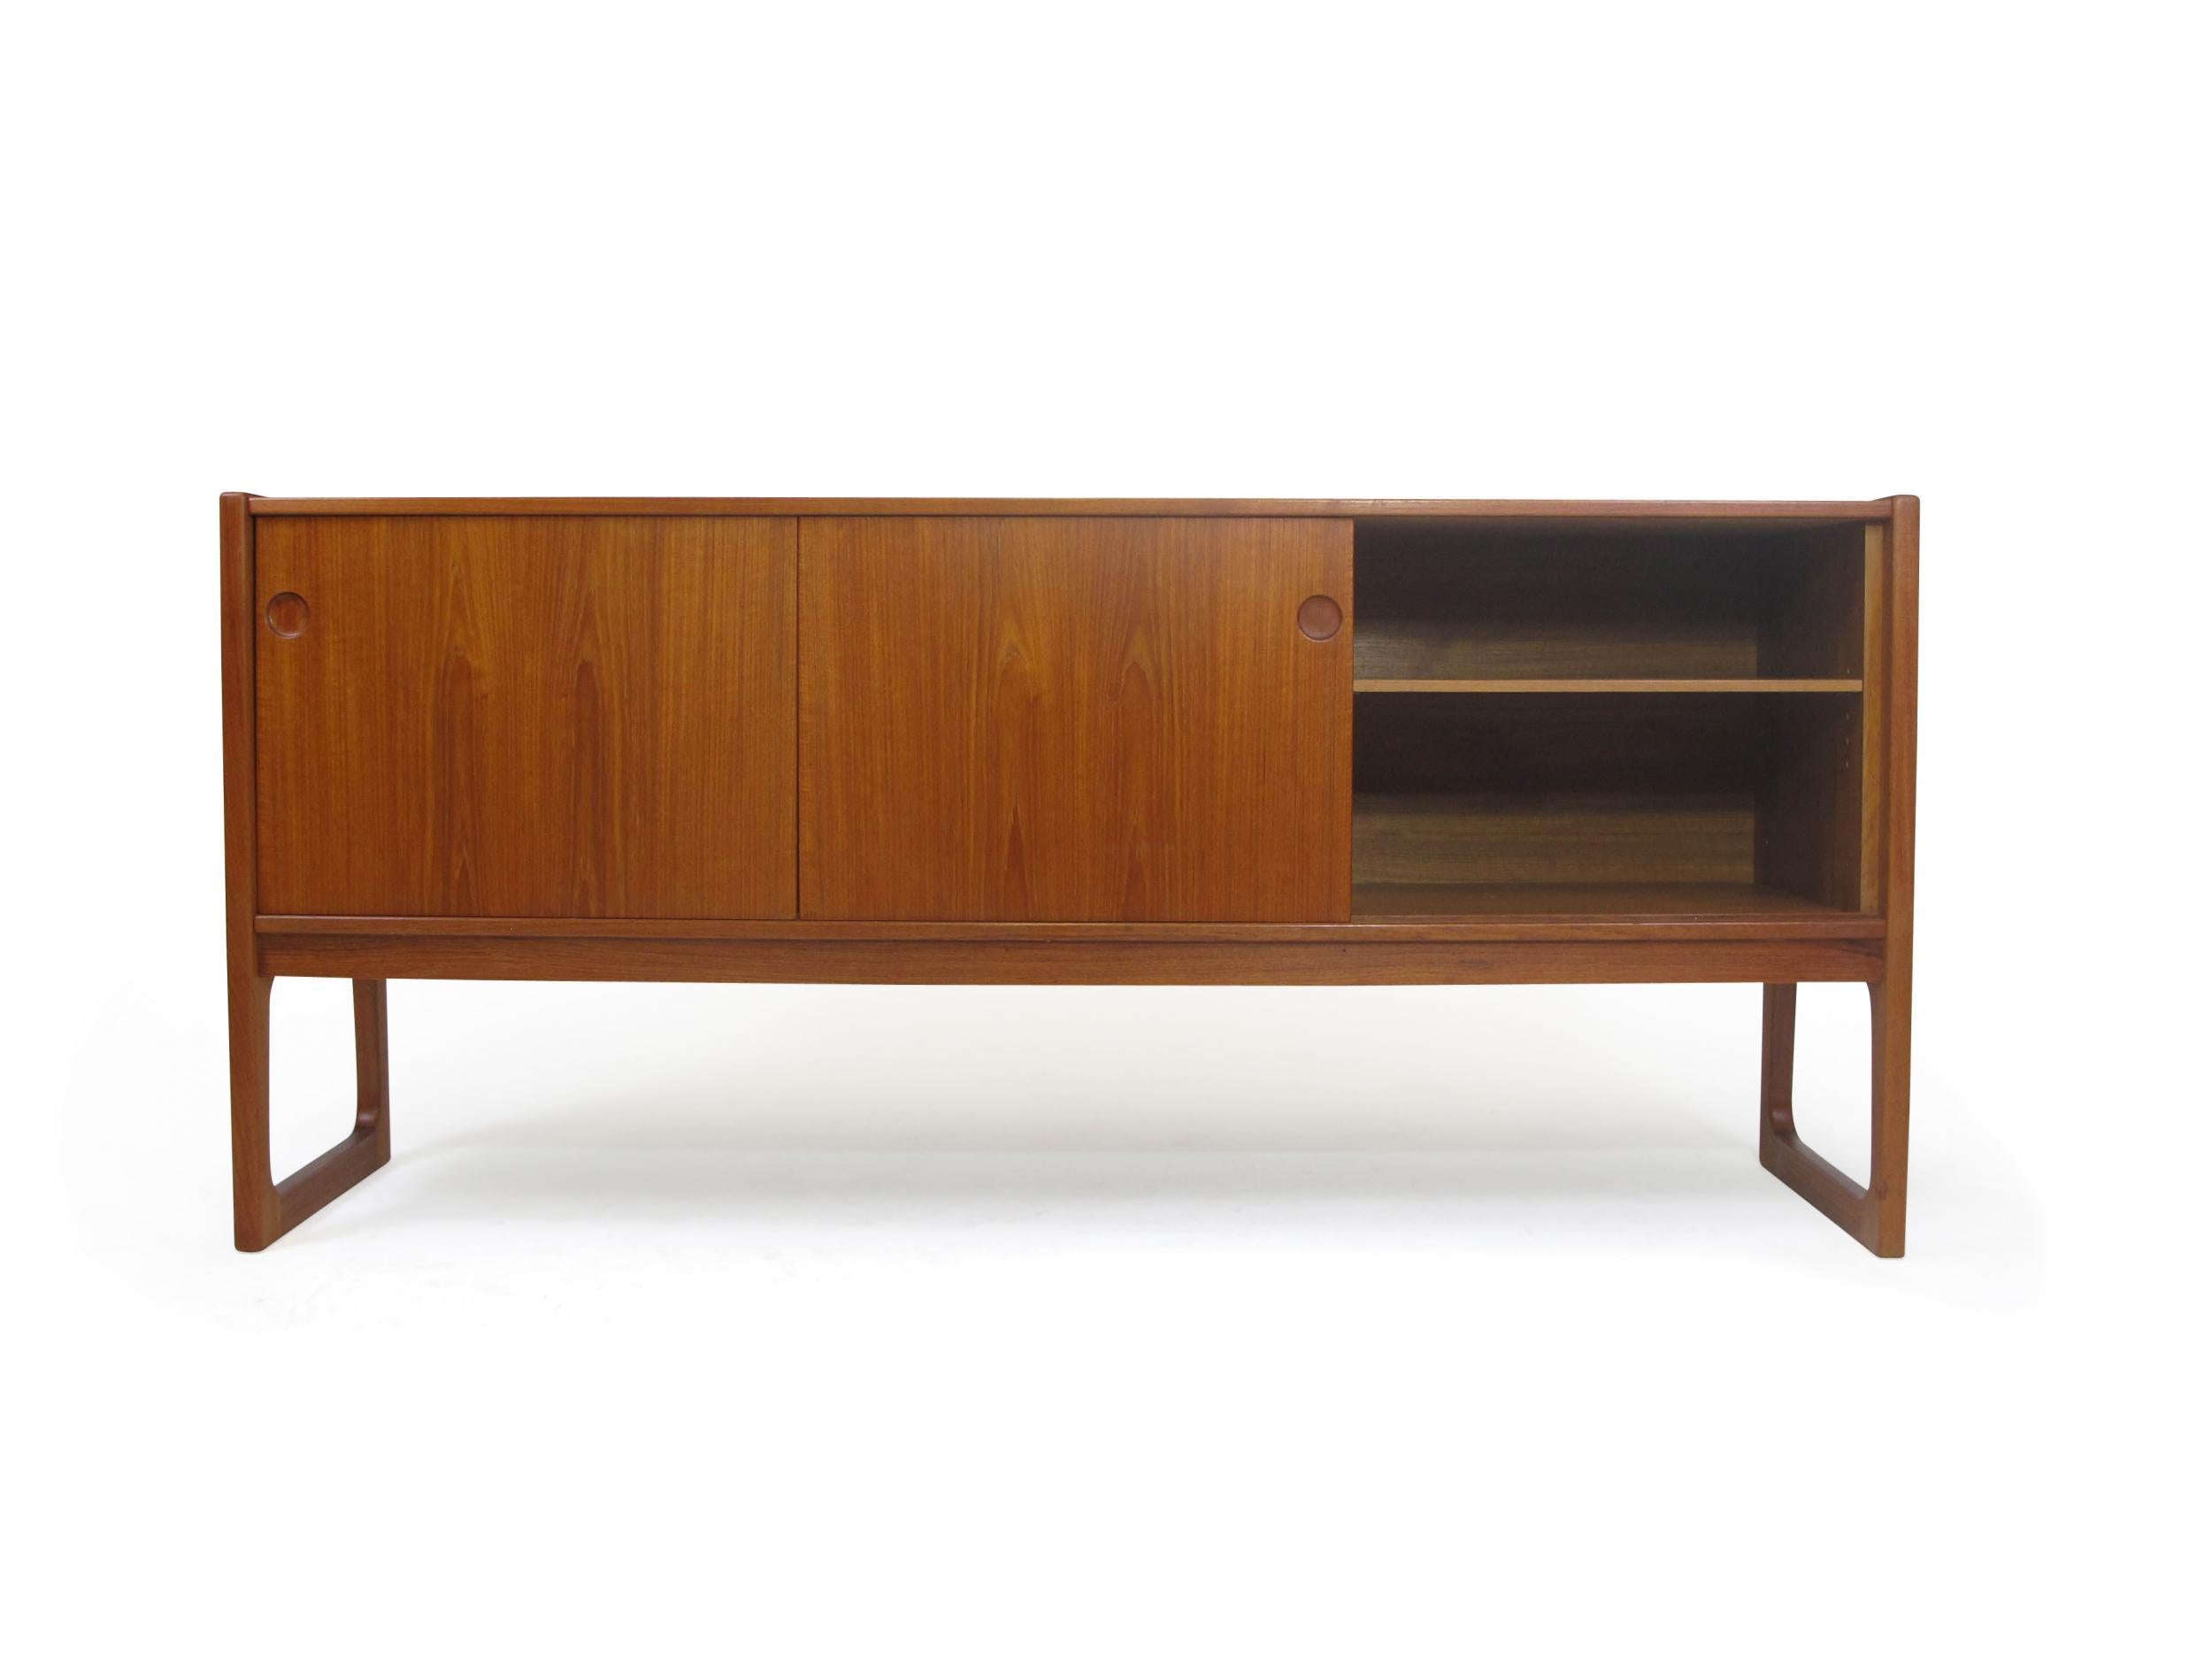 Mid-century teak credenza attributed to Gunni Oman, Denmark. Crafted of teak with book-matched grain and recessed pulls. The cabinet has two sliding doors, three drawers in the center, with adjustable interior shelves, and finished on the back.